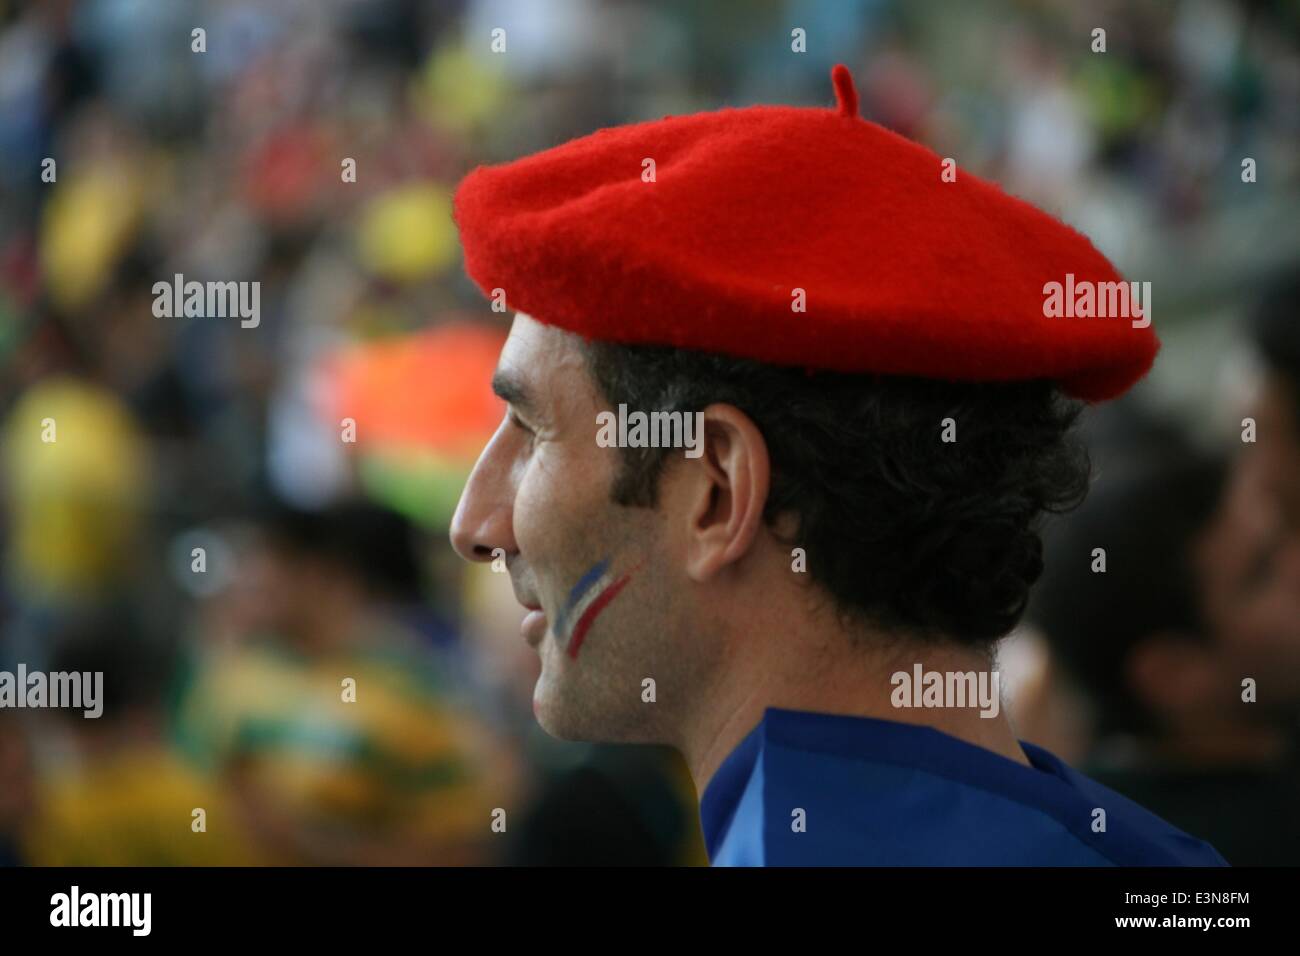 Rio de Janeiro, Brazil. 25th June, 2014. 2014 FIFA World Cup Brazil. French fan at Maracanã in the match against Ecuador. Final score 0-0, thus qualifying France as first in its group for the round of 16. Rio de Janeiro, Brazil, 25th June, 2014. Credit:  Maria Adelaide Silva/Alamy Live News Stock Photo